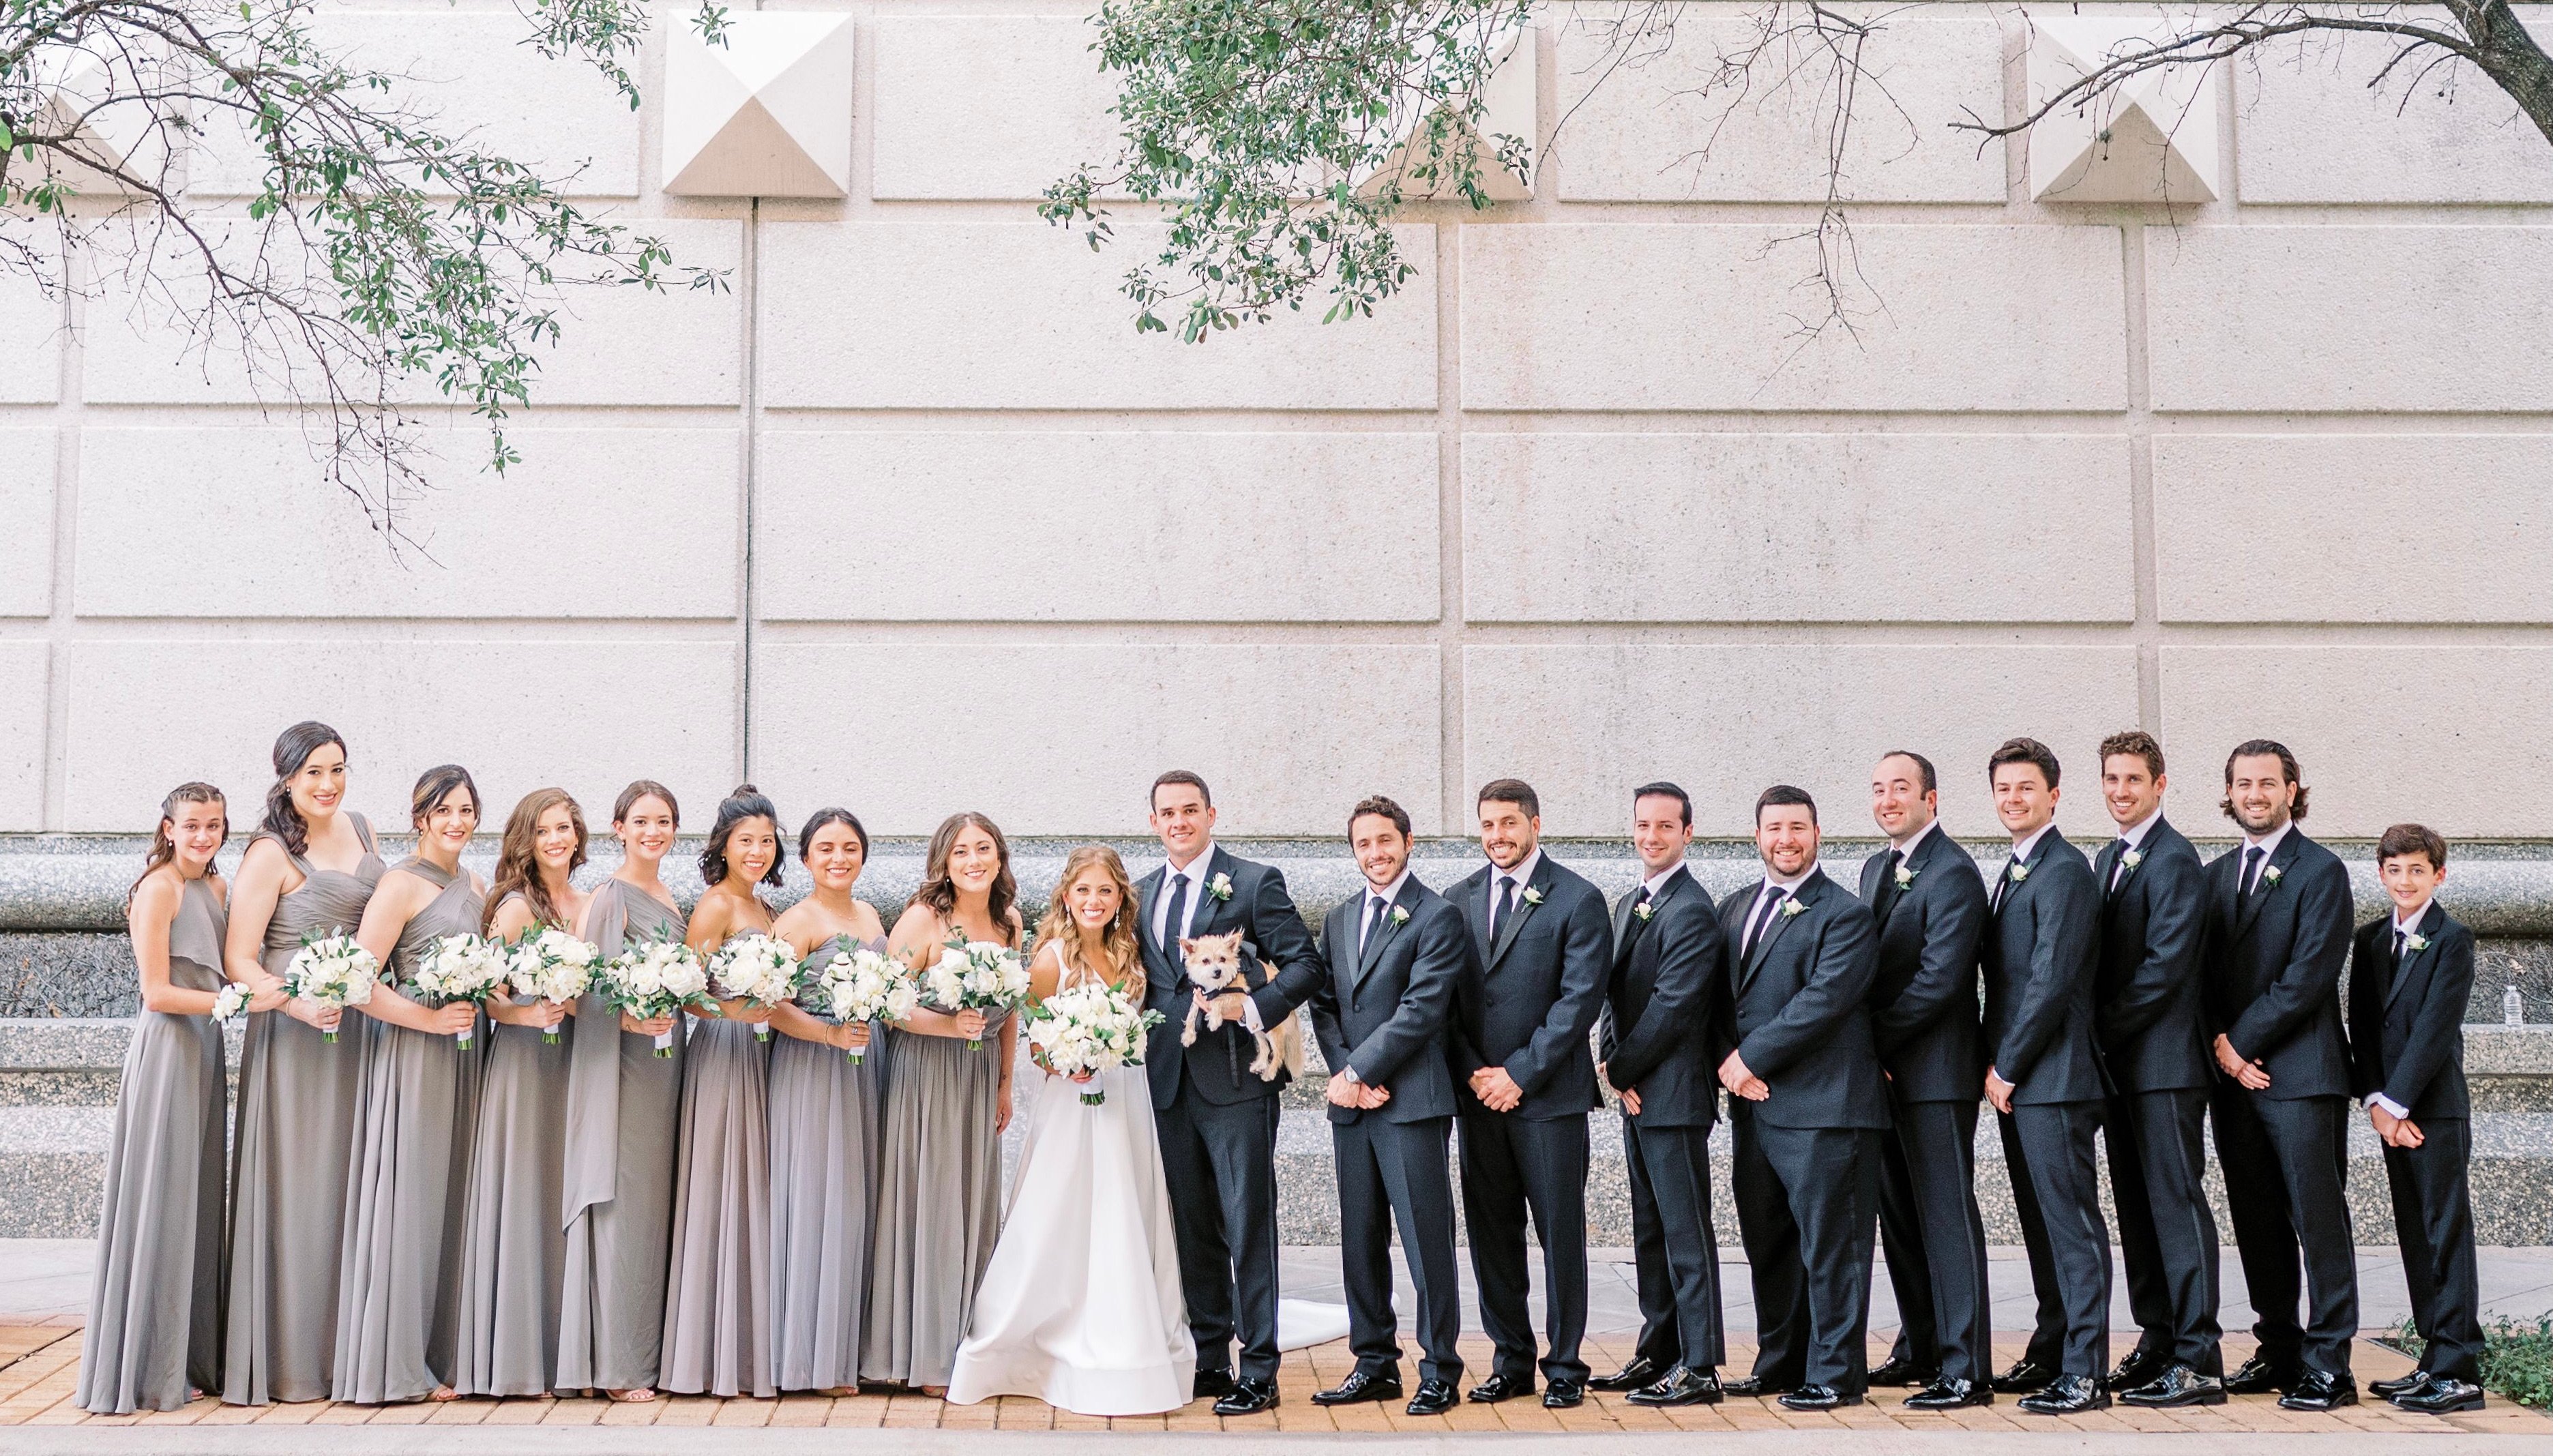 Bride and groom stand outside the venue in Downtown Houston with all of their bridesmaids and groomsmen. The groom is also holding his dog. The wedding party all wear monochromatic colors of white, gray and black.